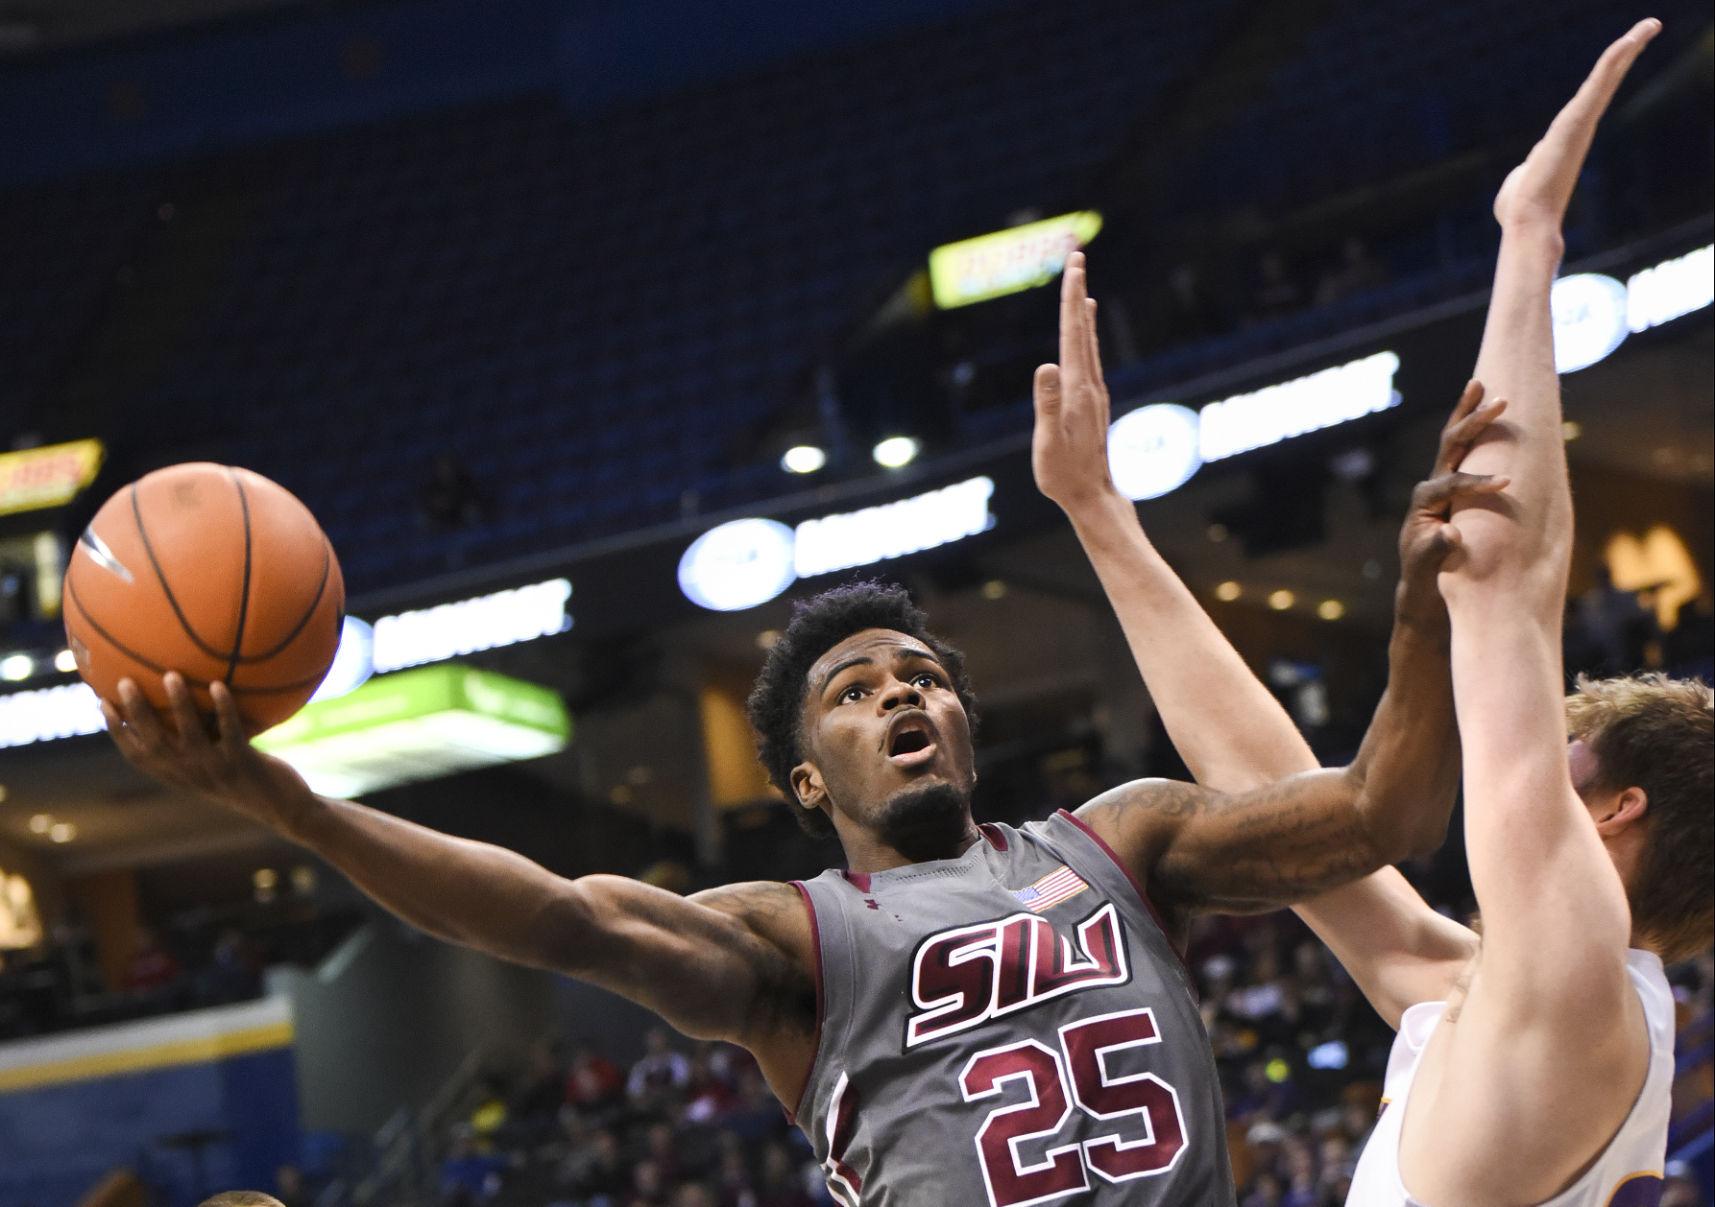 Anthony Beane attempts a shot during the Salukis' 66-60 loss to Northern Iowa on Friday during the Missouri Valley Conference Tournament in St. Louis. (DailyEgyptian.com file photo)